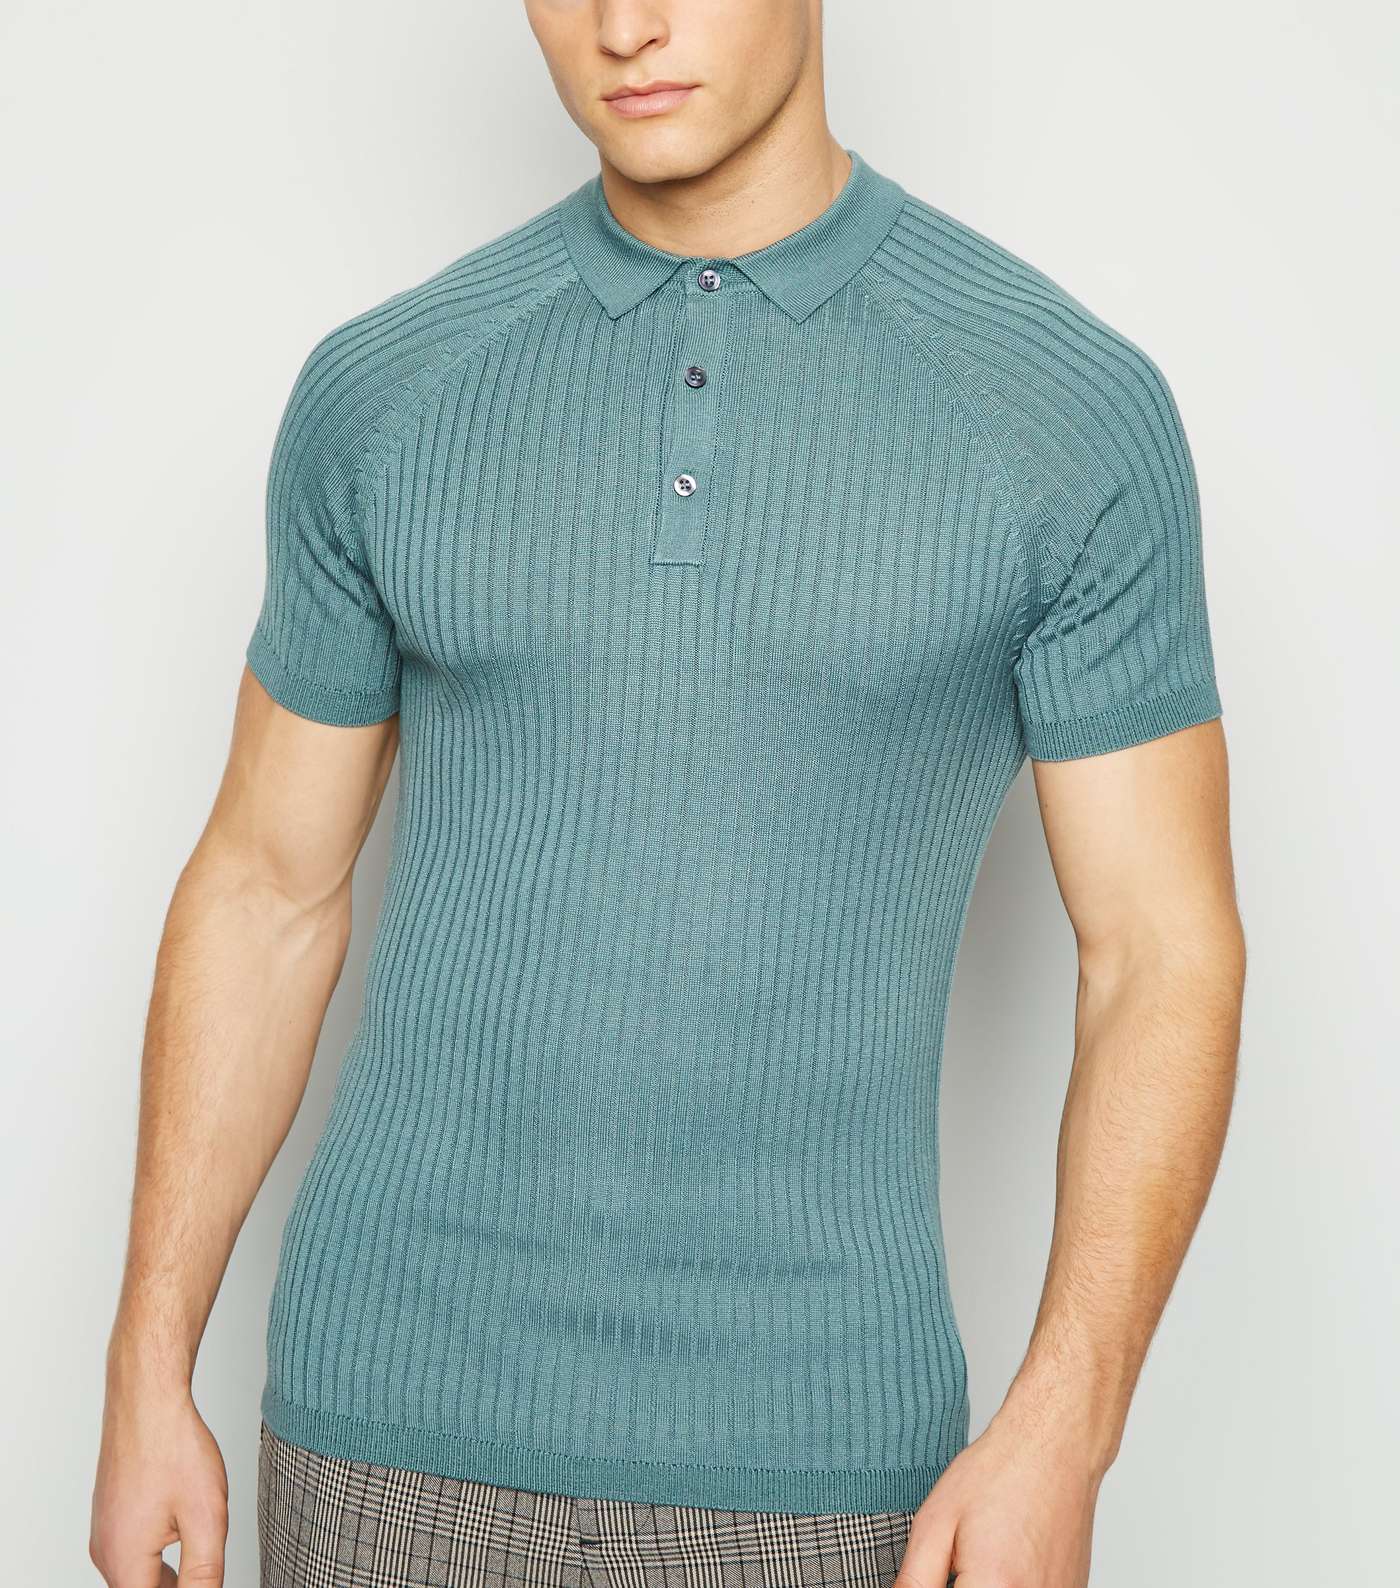 Teal Knit Muscle Fit Polo Shirt